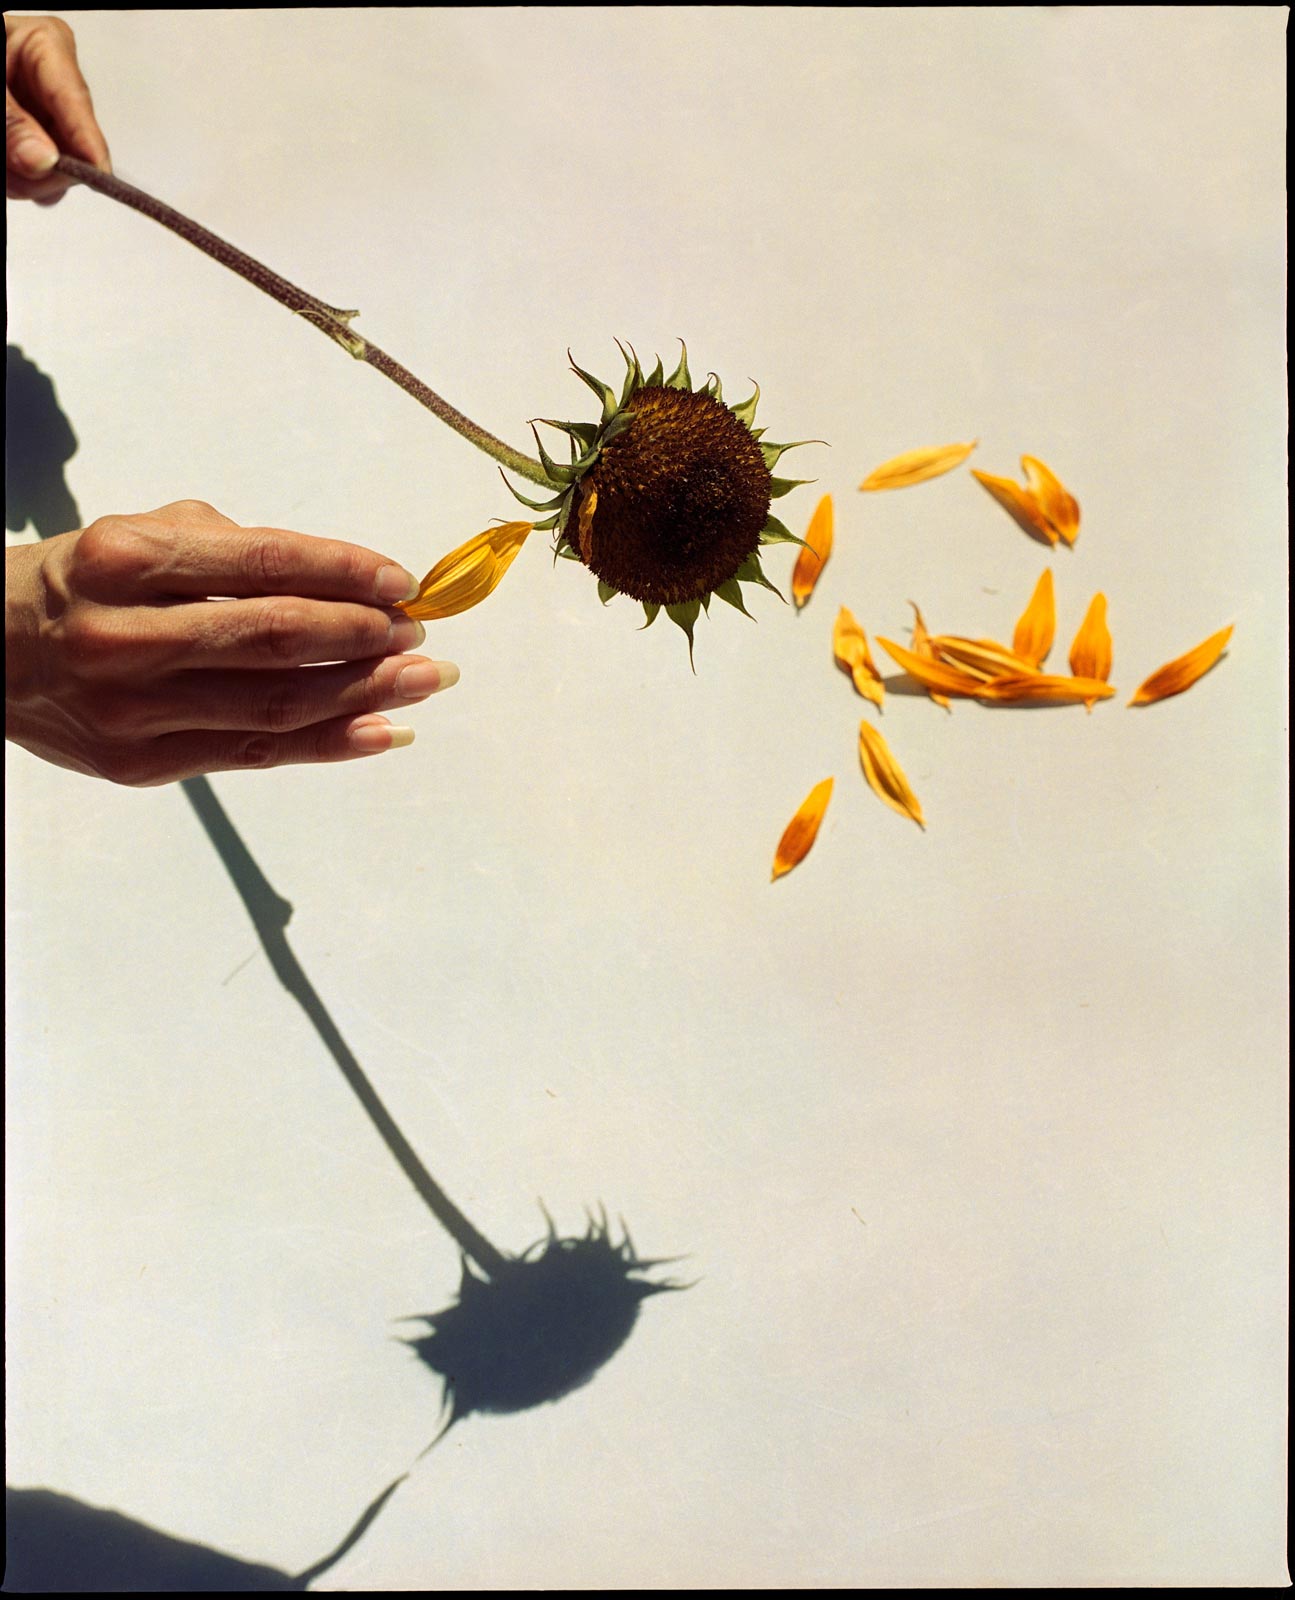 Sunflower petals being pulled off, artistic observation, analogue photography.